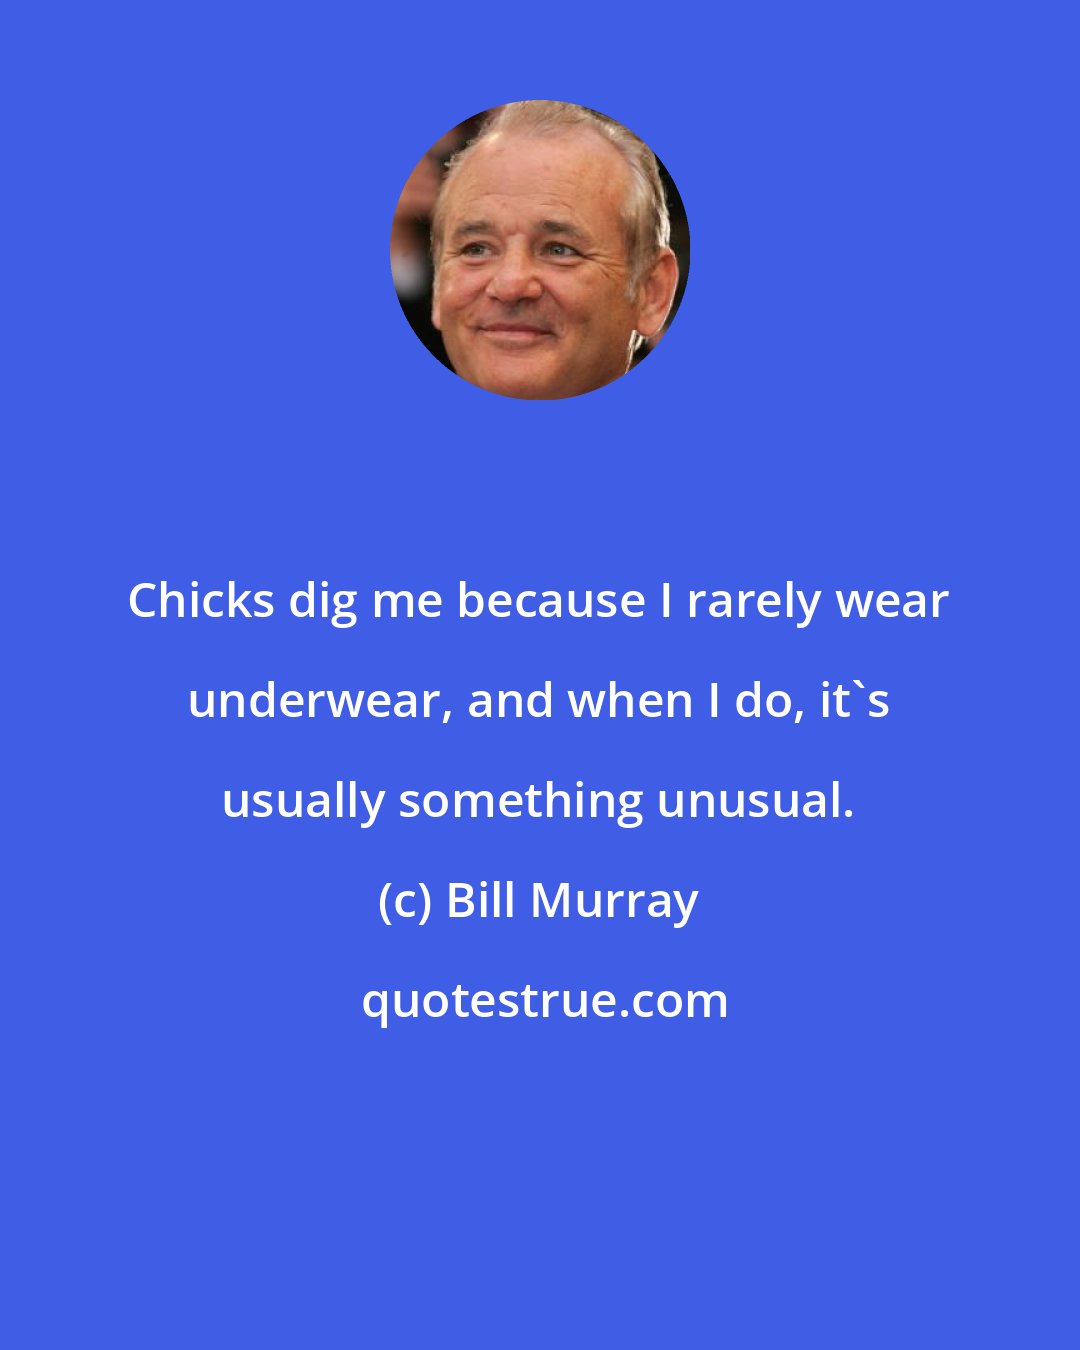 Bill Murray: Chicks dig me because I rarely wear underwear, and when I do, it's usually something unusual.